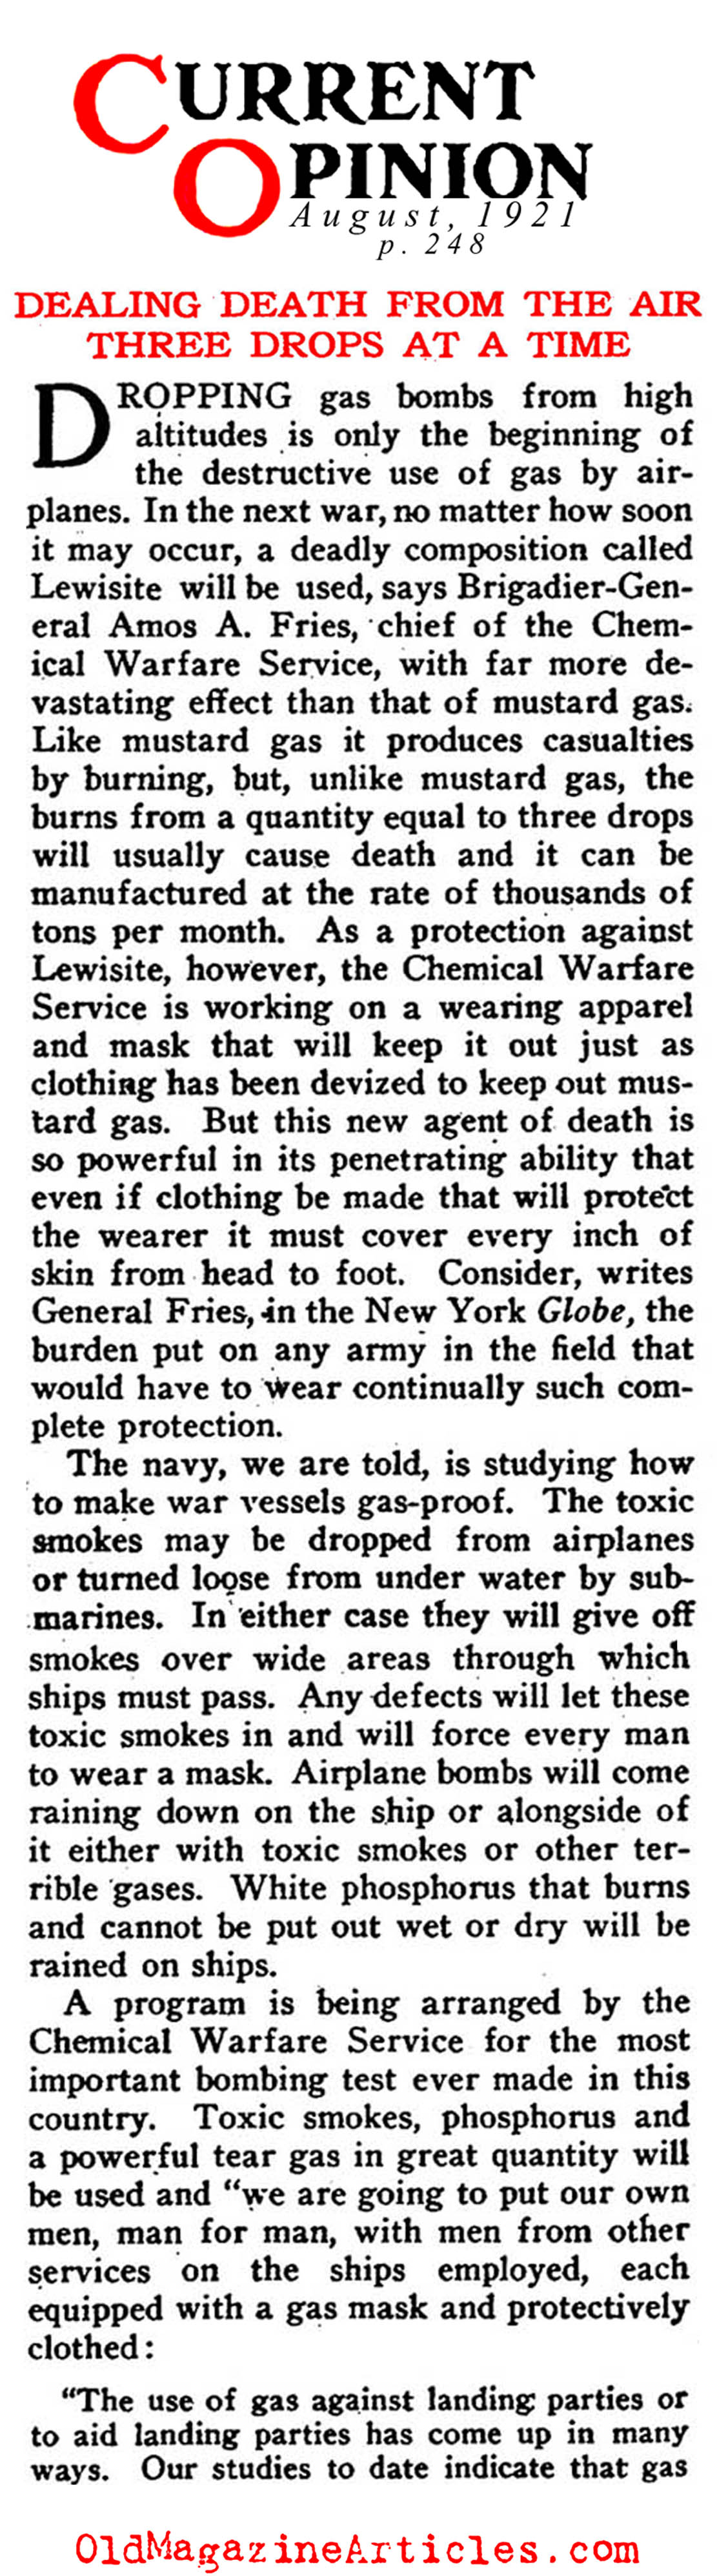 The Future of War and Chemical Weapons (Current Opinion, 1921)